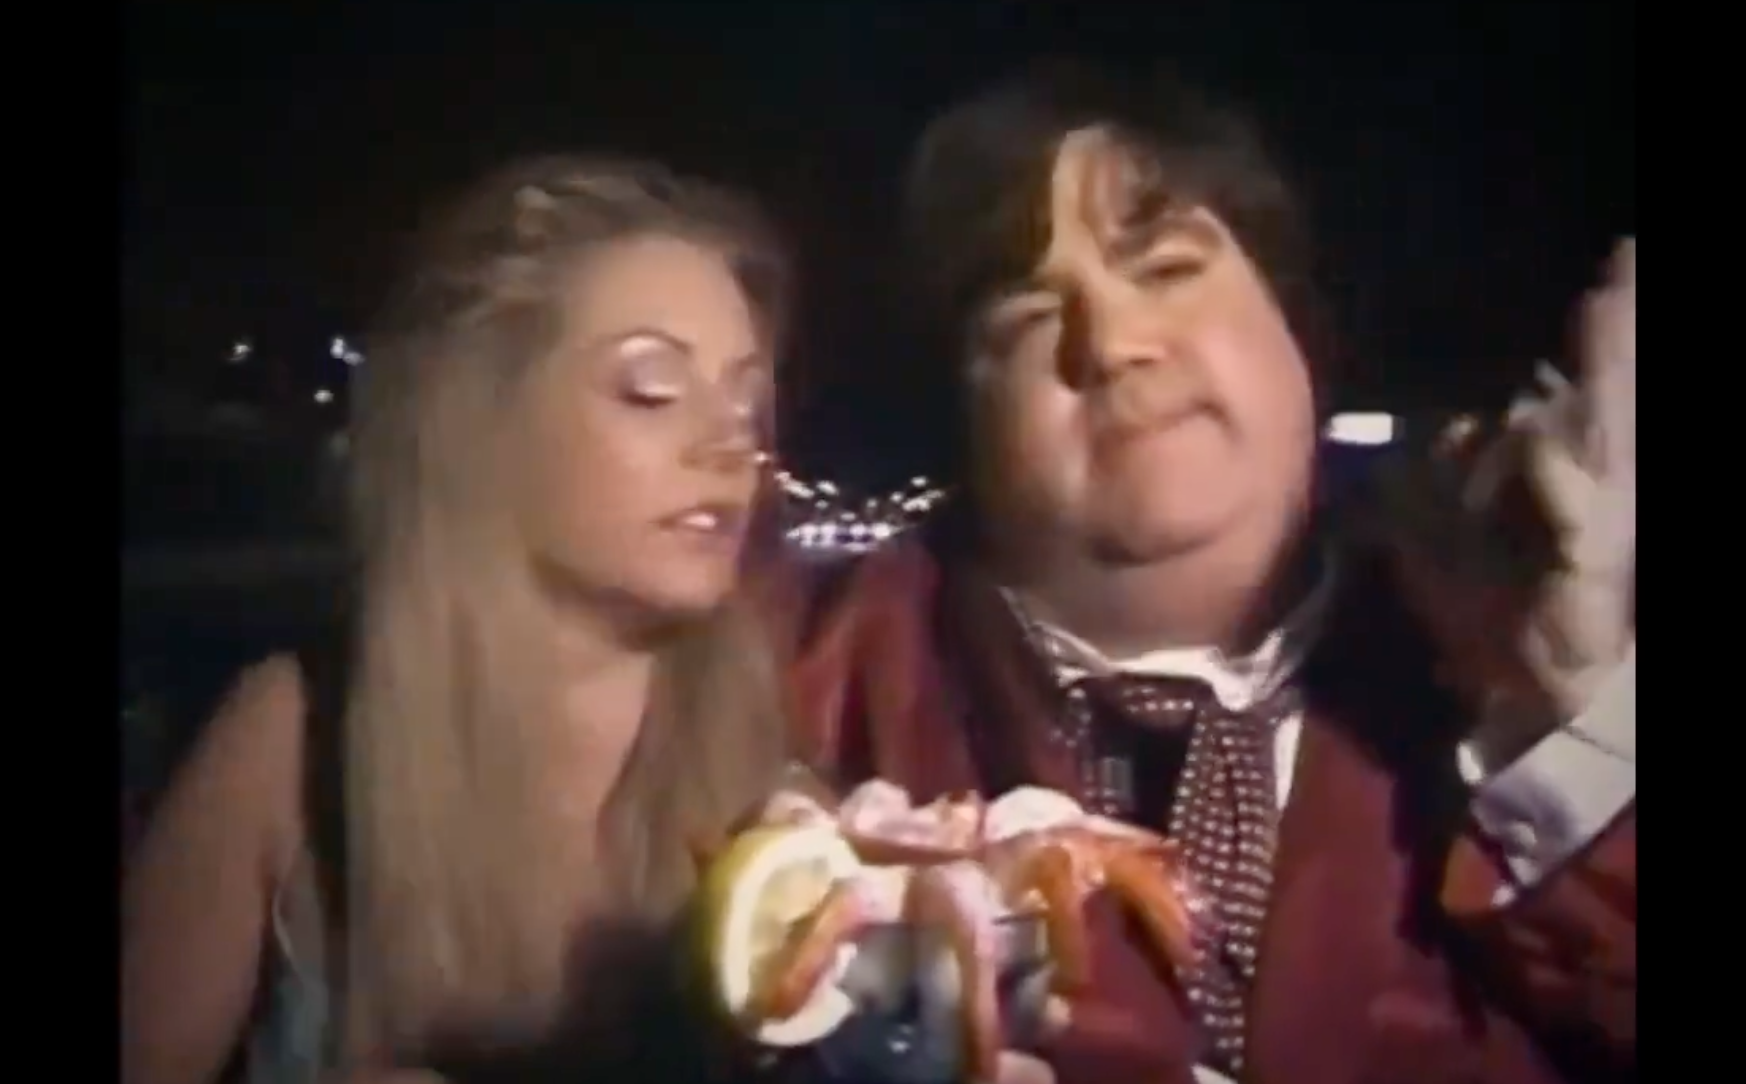 Dan Schneider is said to have created the 'All That' star 'Hand-Feeding Shrimp.'